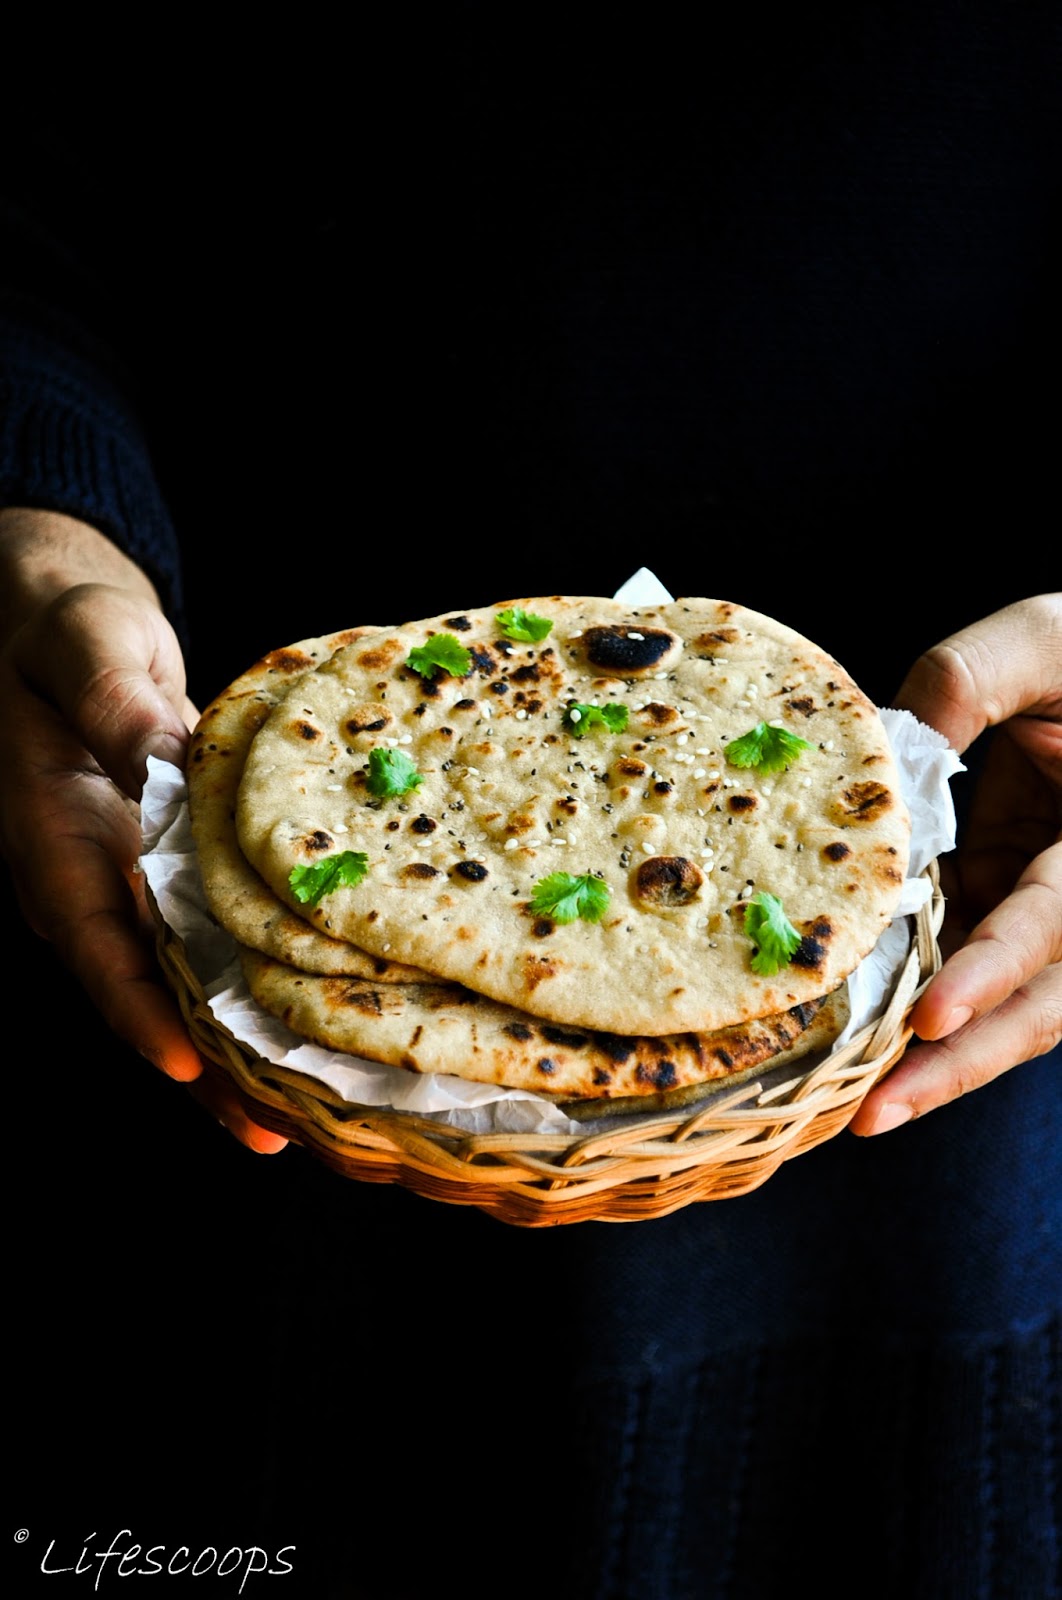 Life Scoops: Soft Wheat Naan / Indian Flat Bread